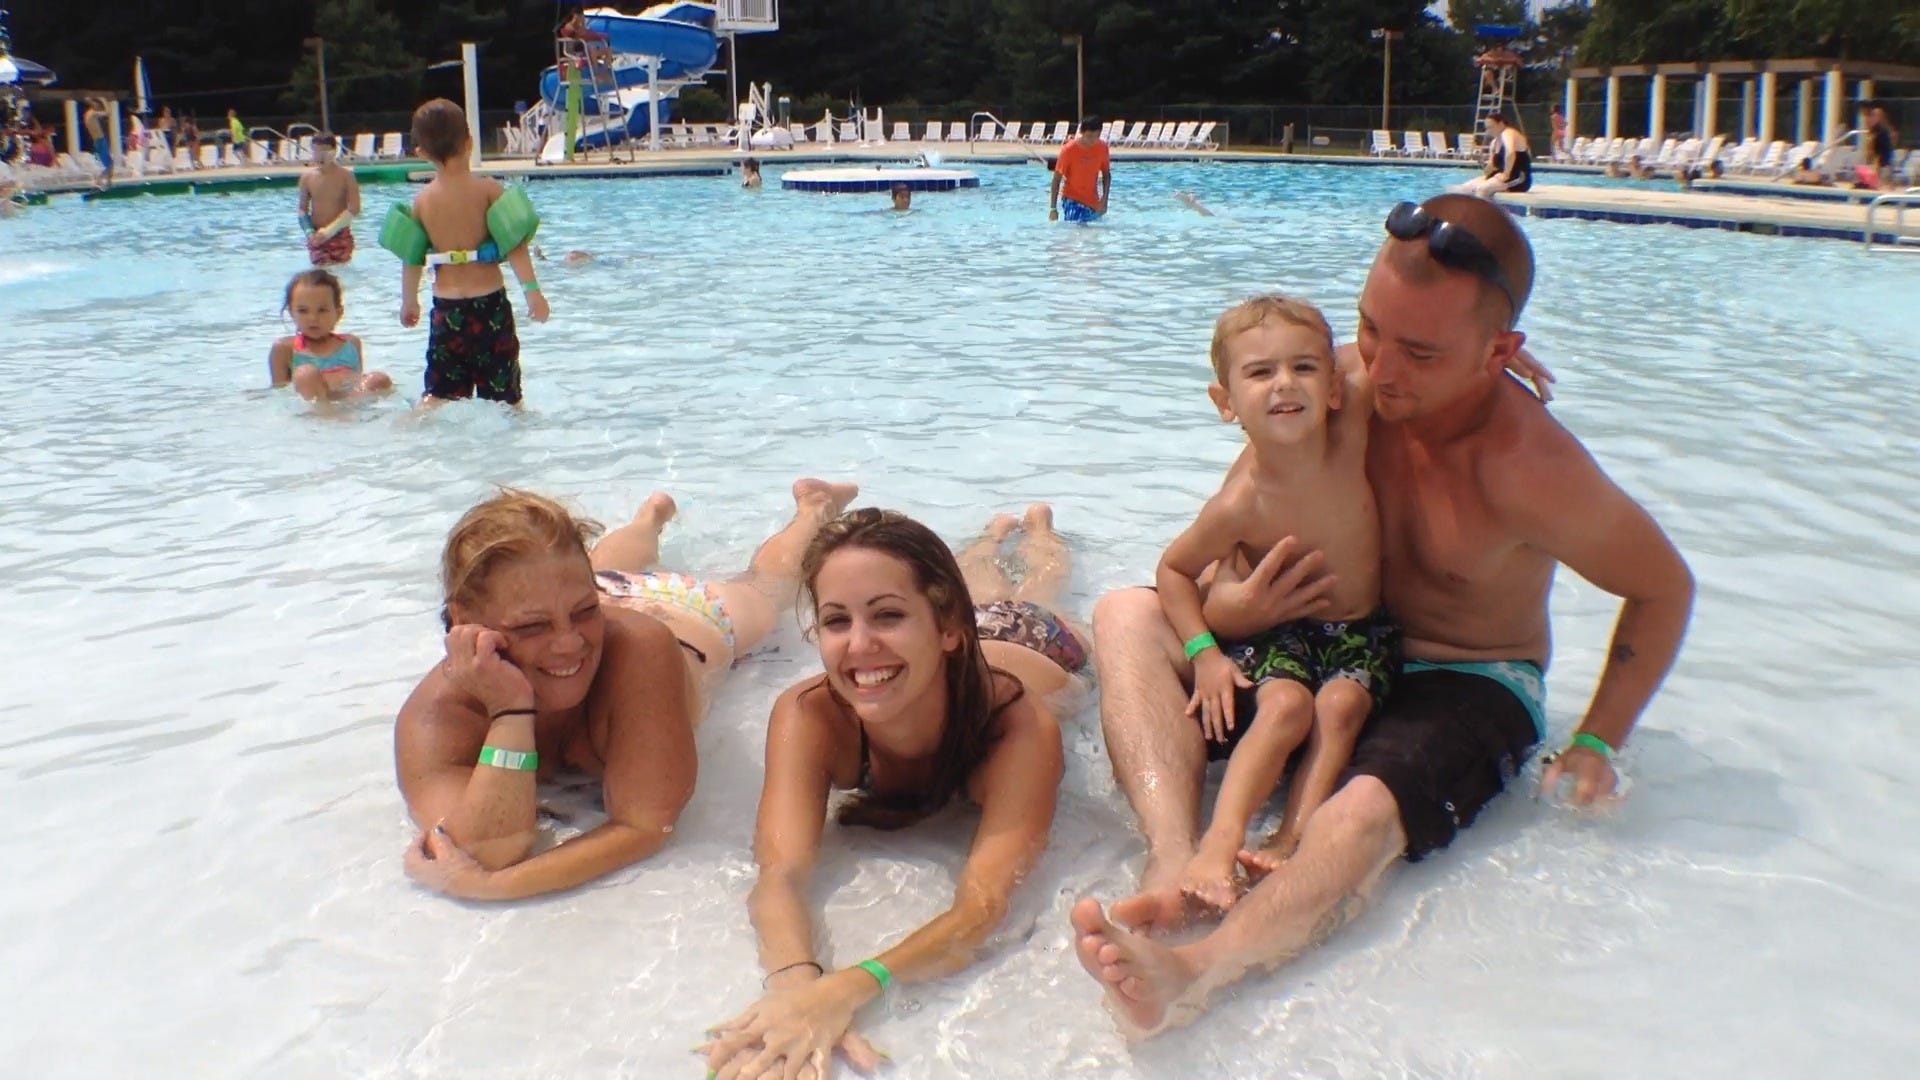 You and your kids can dive into a good time at Killens Pond Water Park, starting Memorial Day weekend.